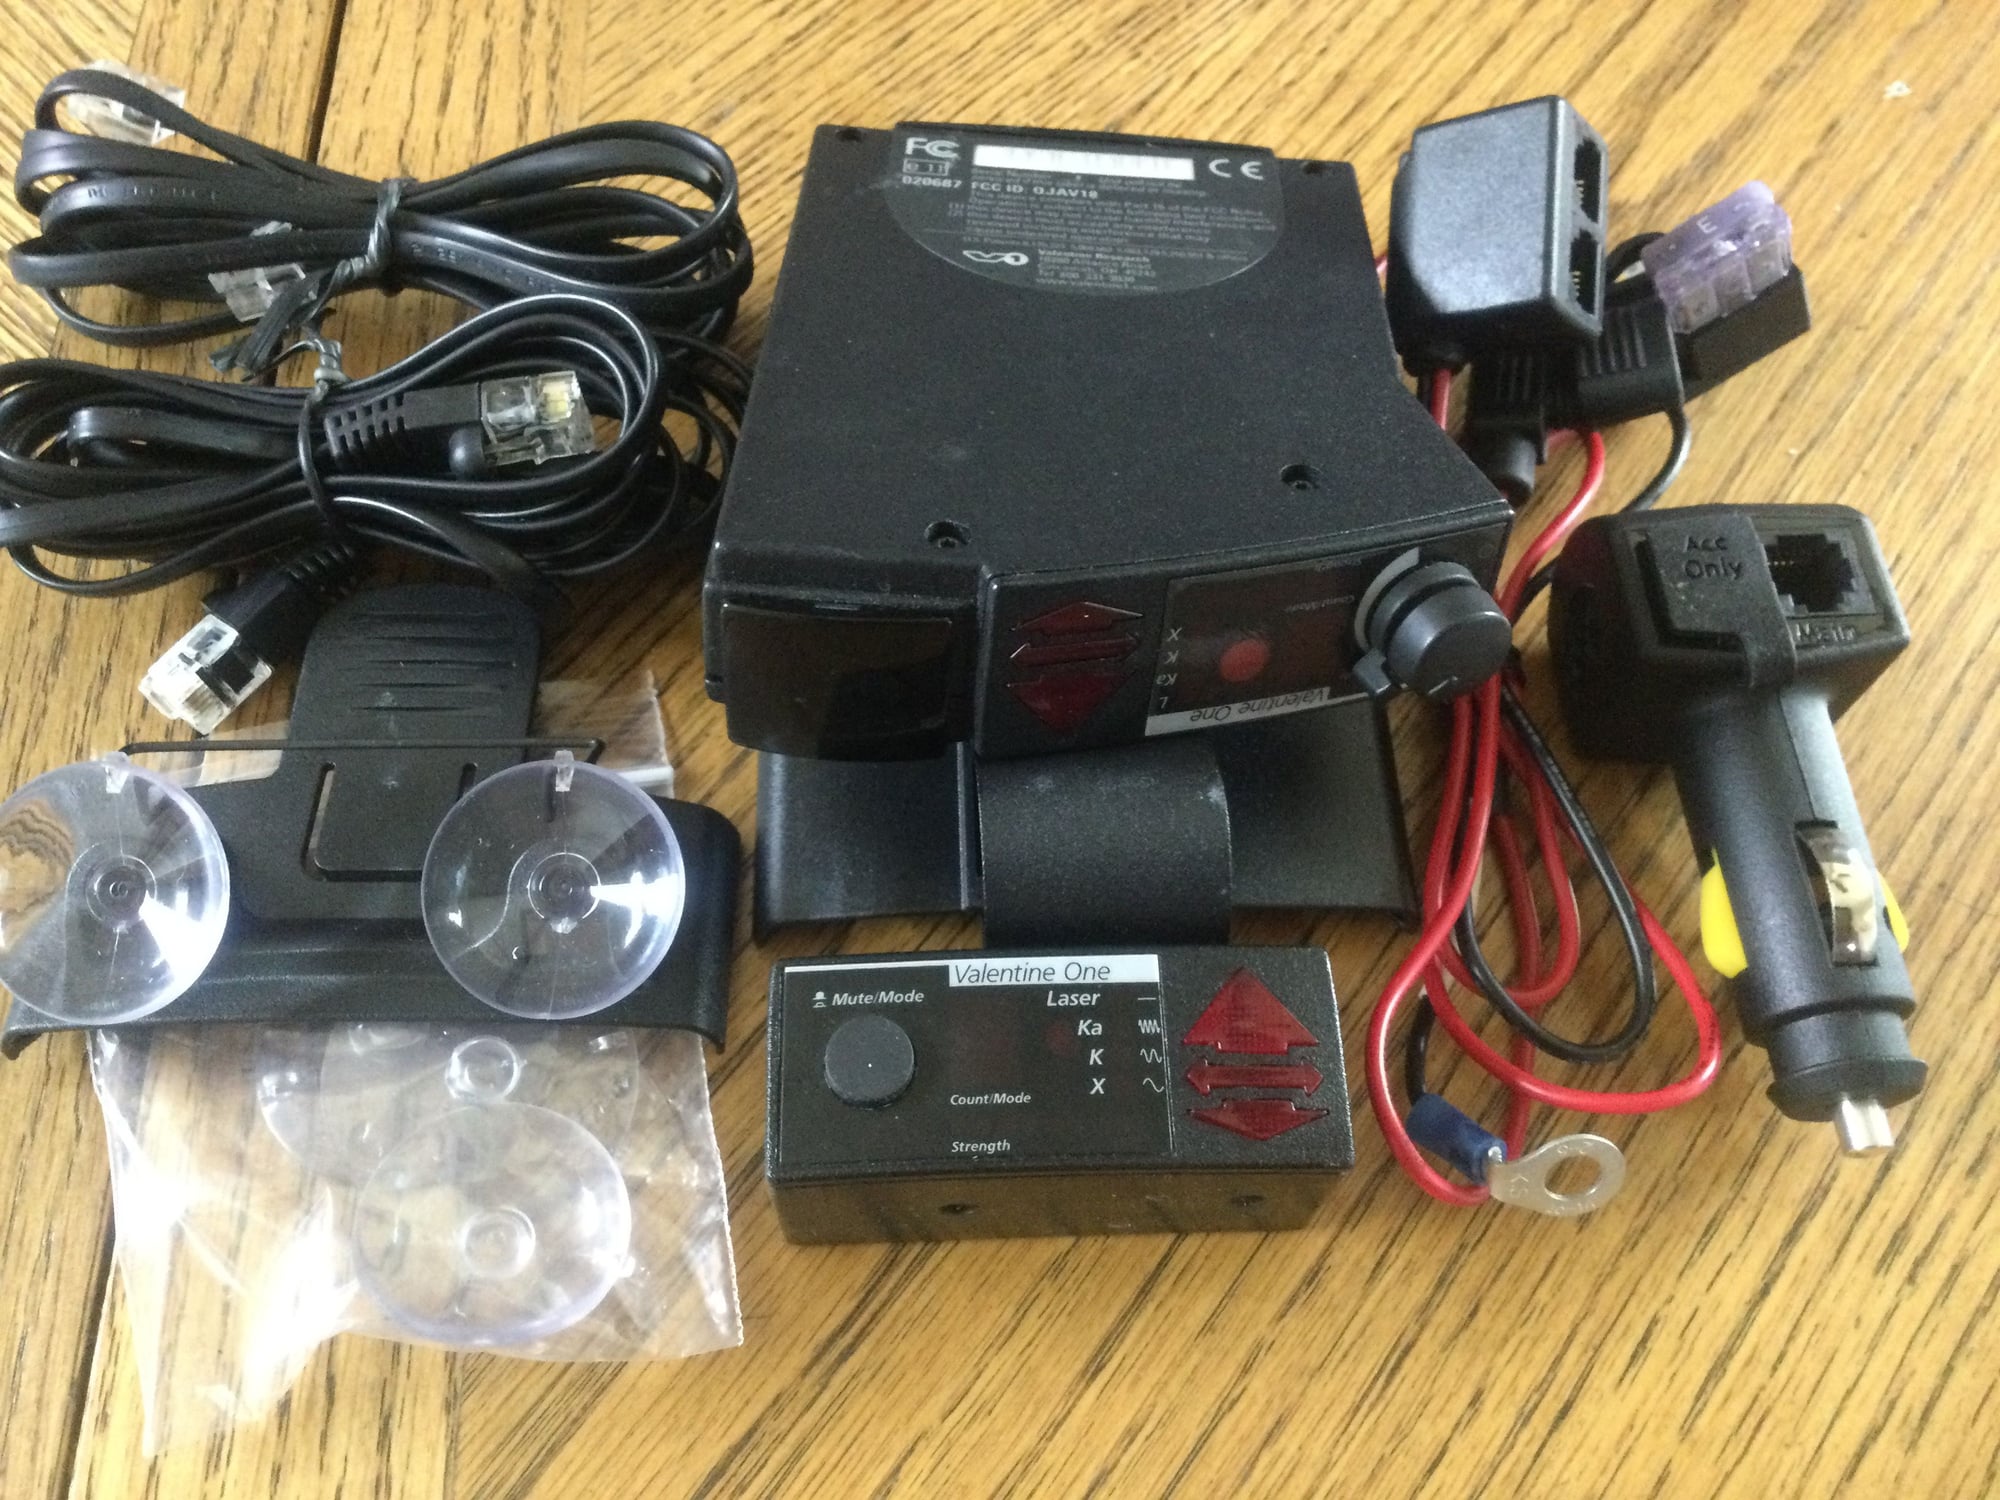 Audio Video/Electronics - FS: Valentine 1 Radar Detector - Used - All Years Any Make All Models - Dublin, CA 94568, United States